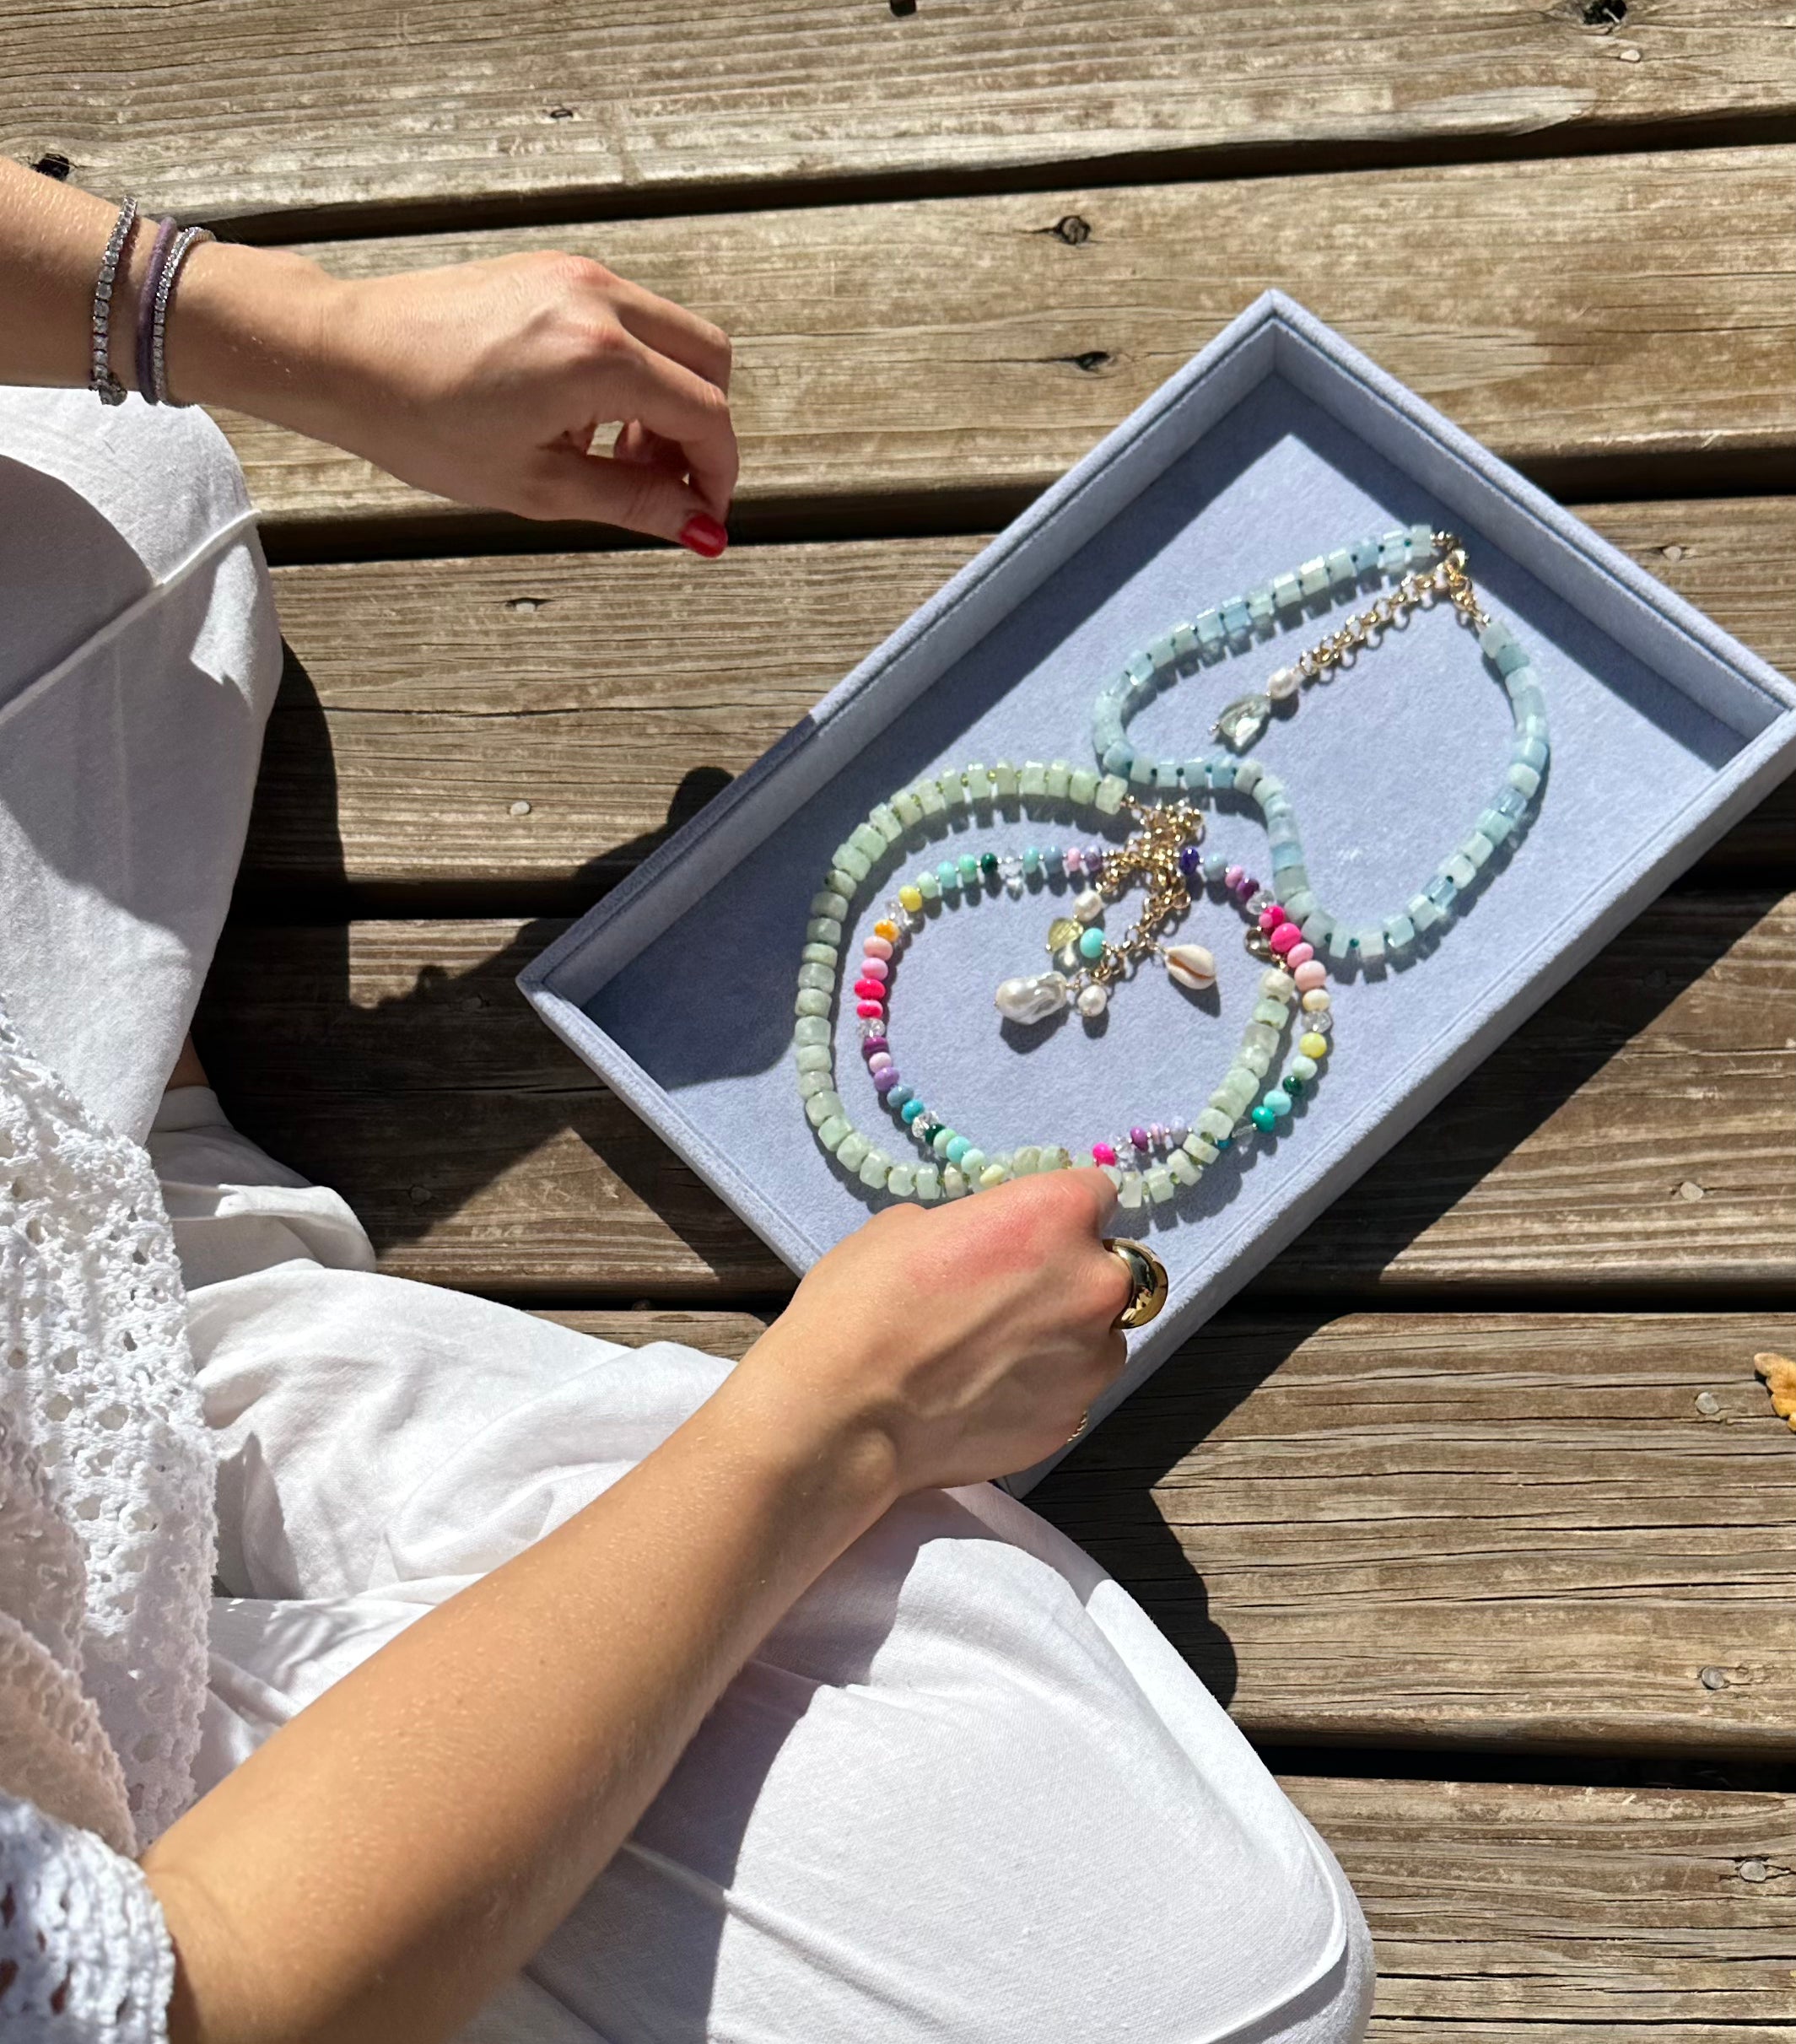 POSITANO OPAL BEADED NECKLACE WITH RONDELLE BEADS